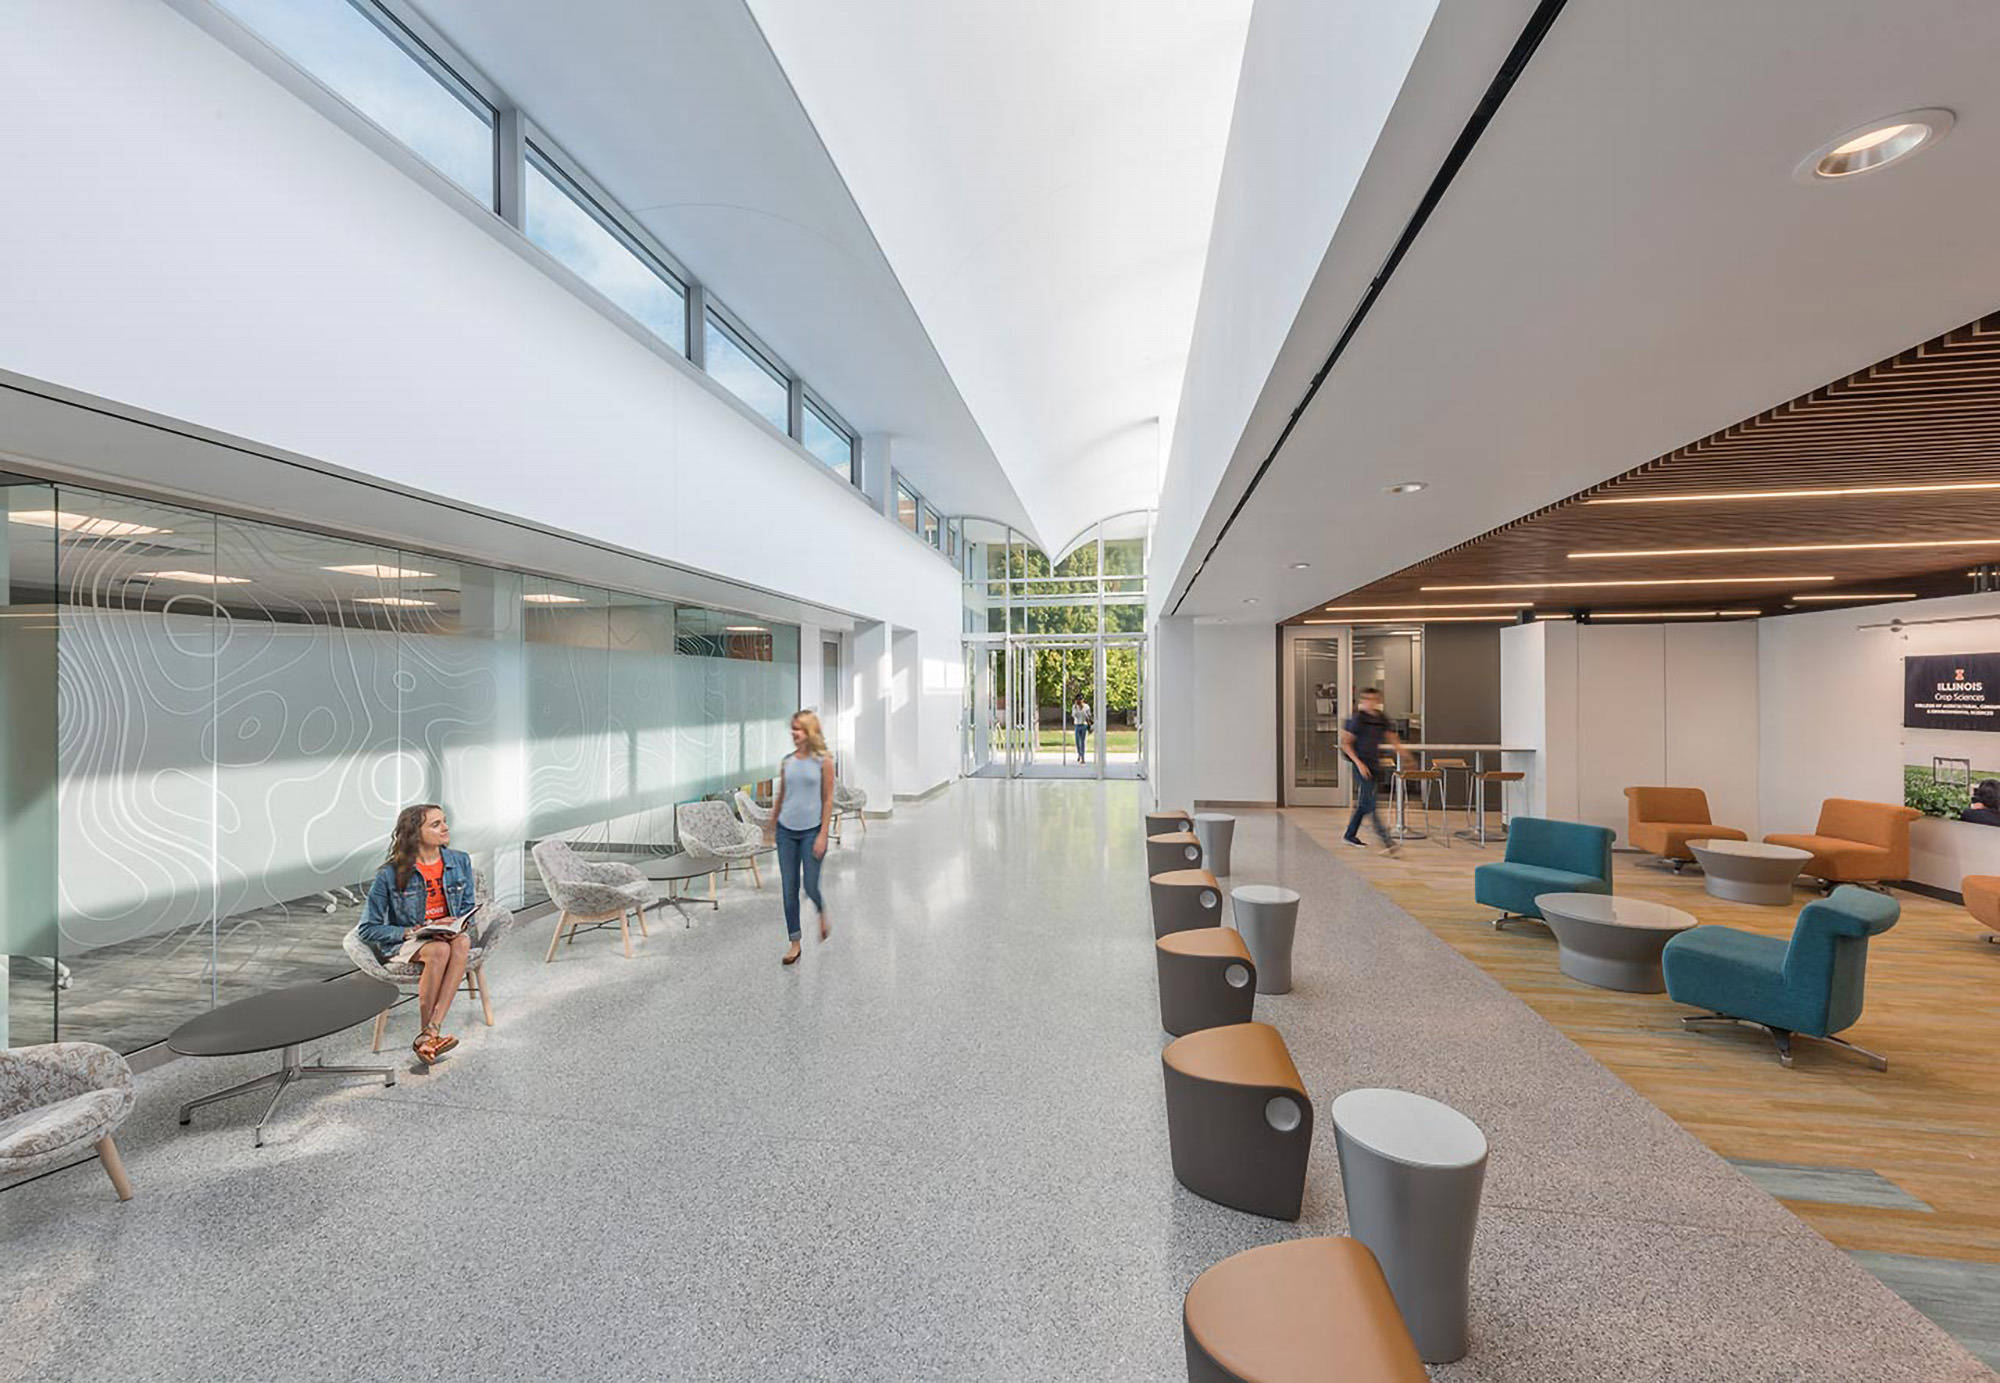 Light-filled higher education atrium with seating areas for students